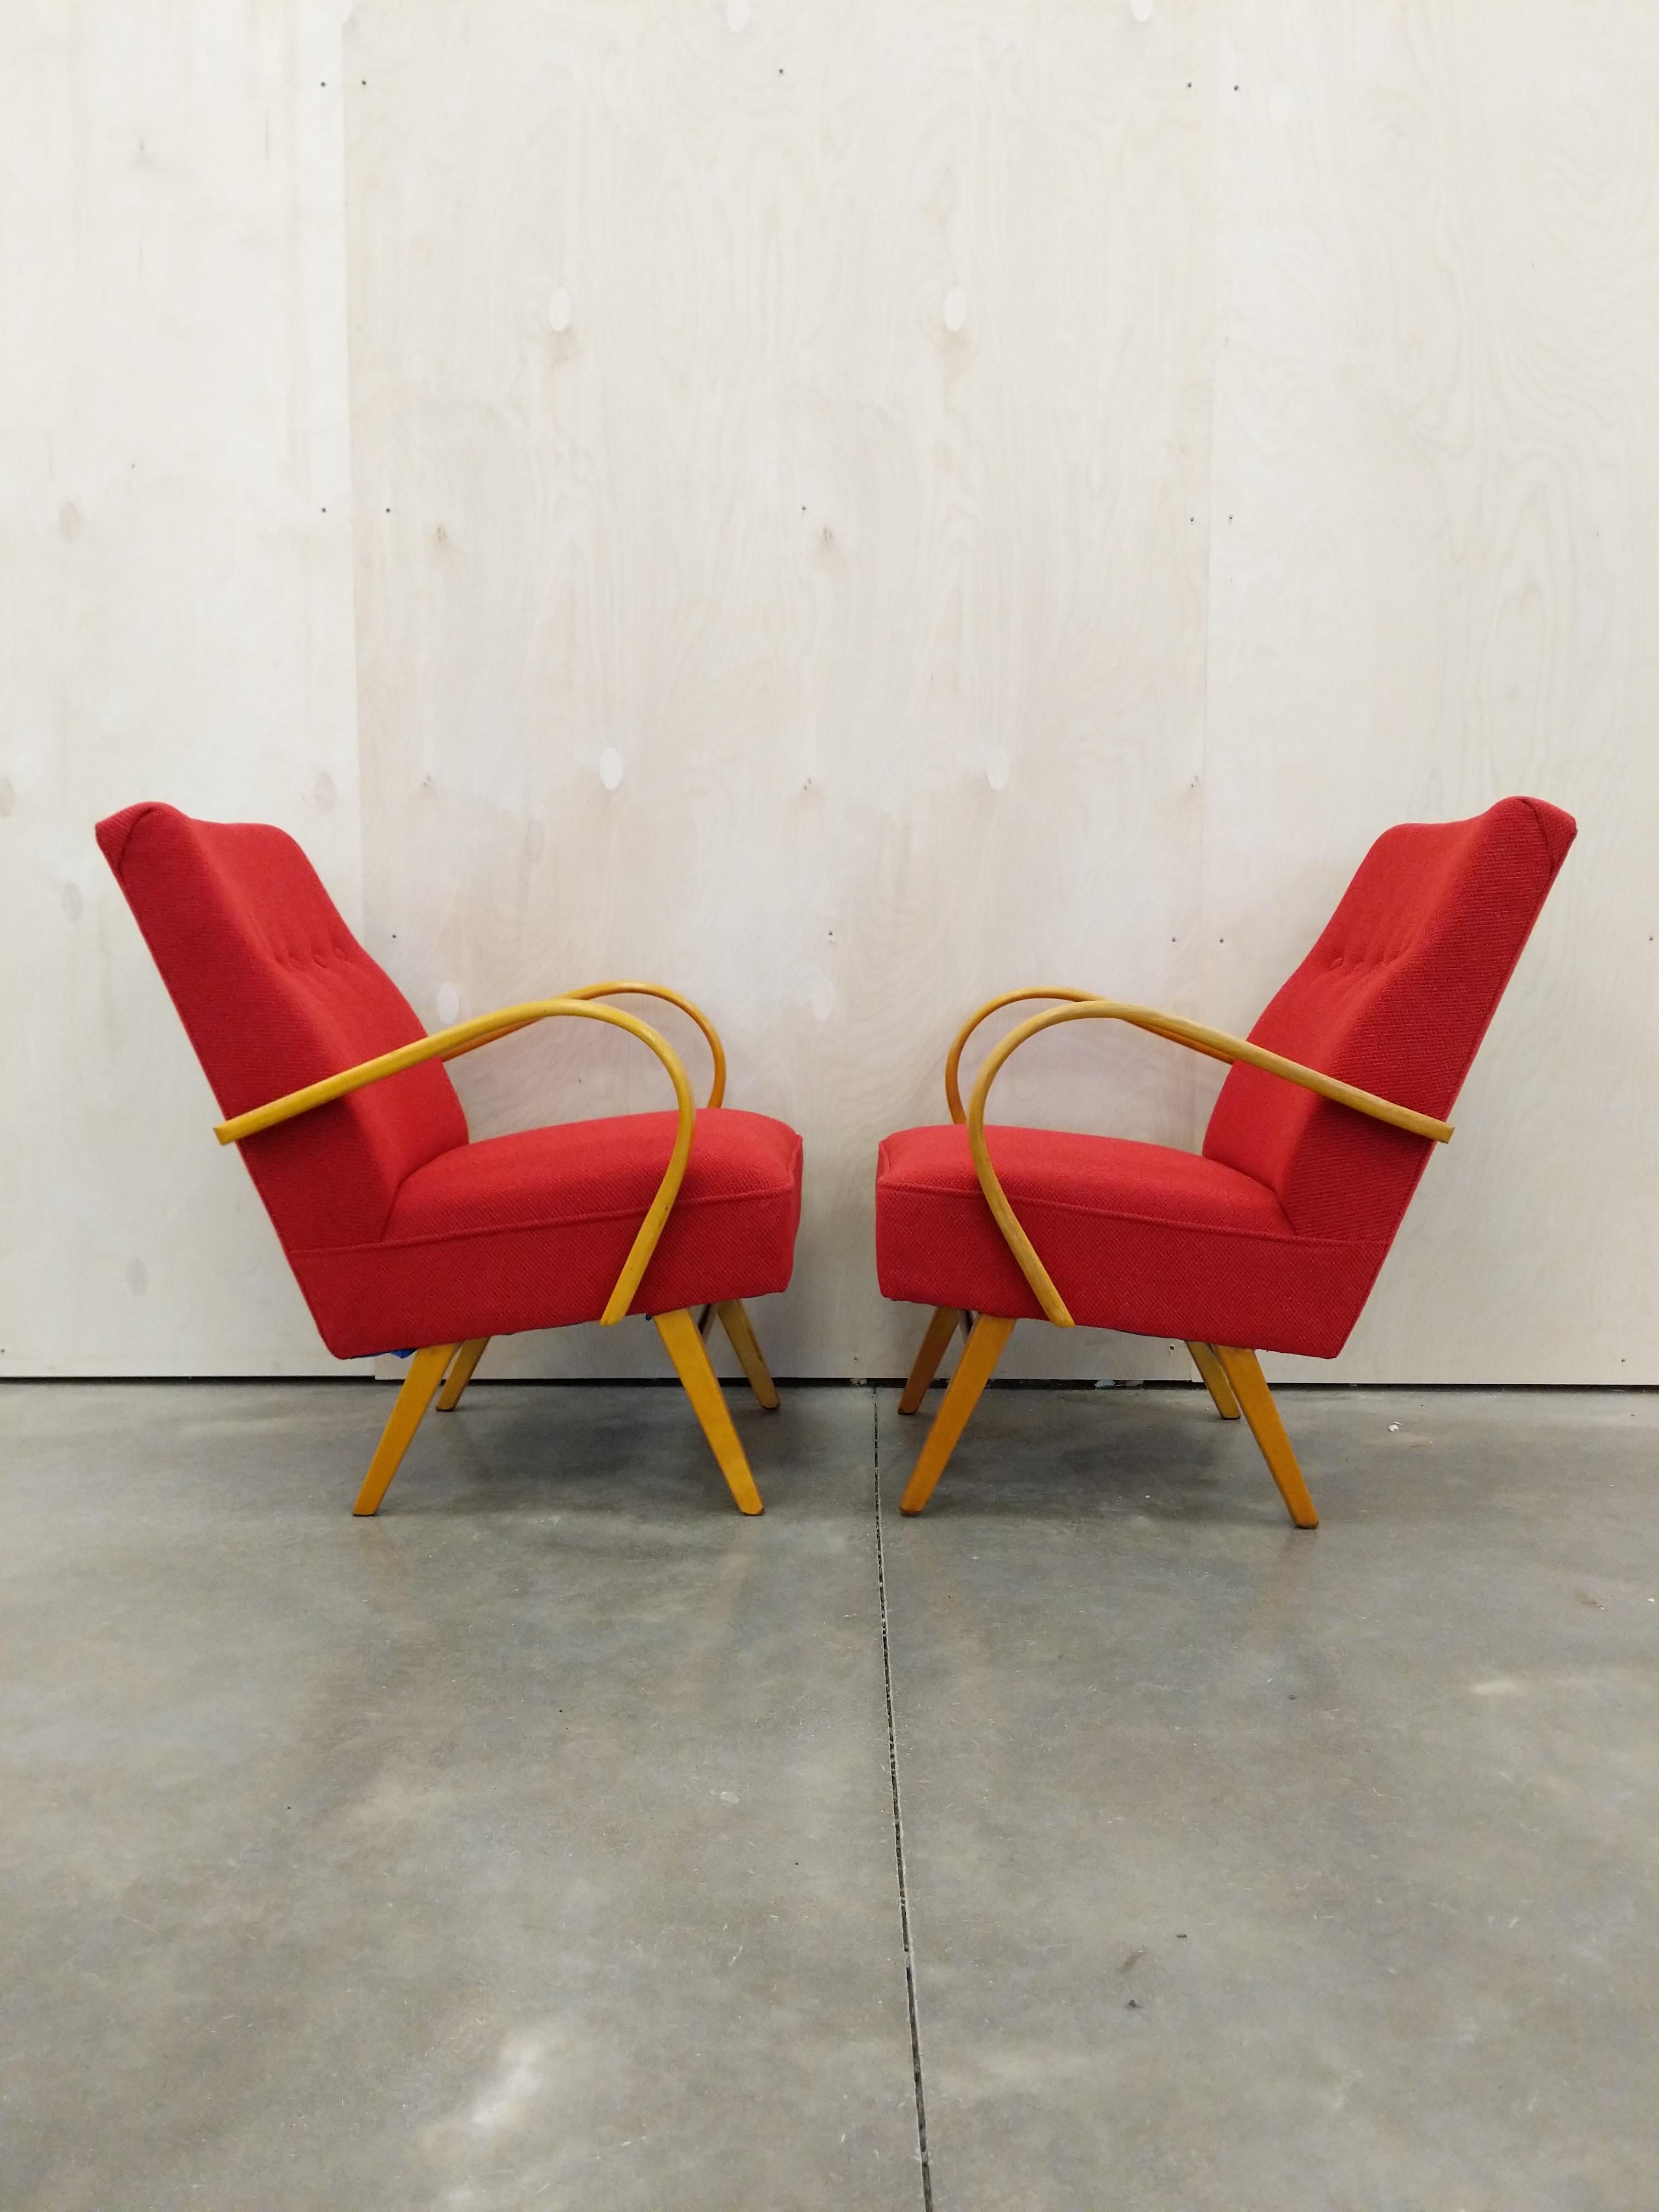 Pair of authentic vintage Czech mid century modern lounge / club chairs.

This set is in excellent refinished condition with brand new Knoll upholstery (see photos).

We used Knoll 